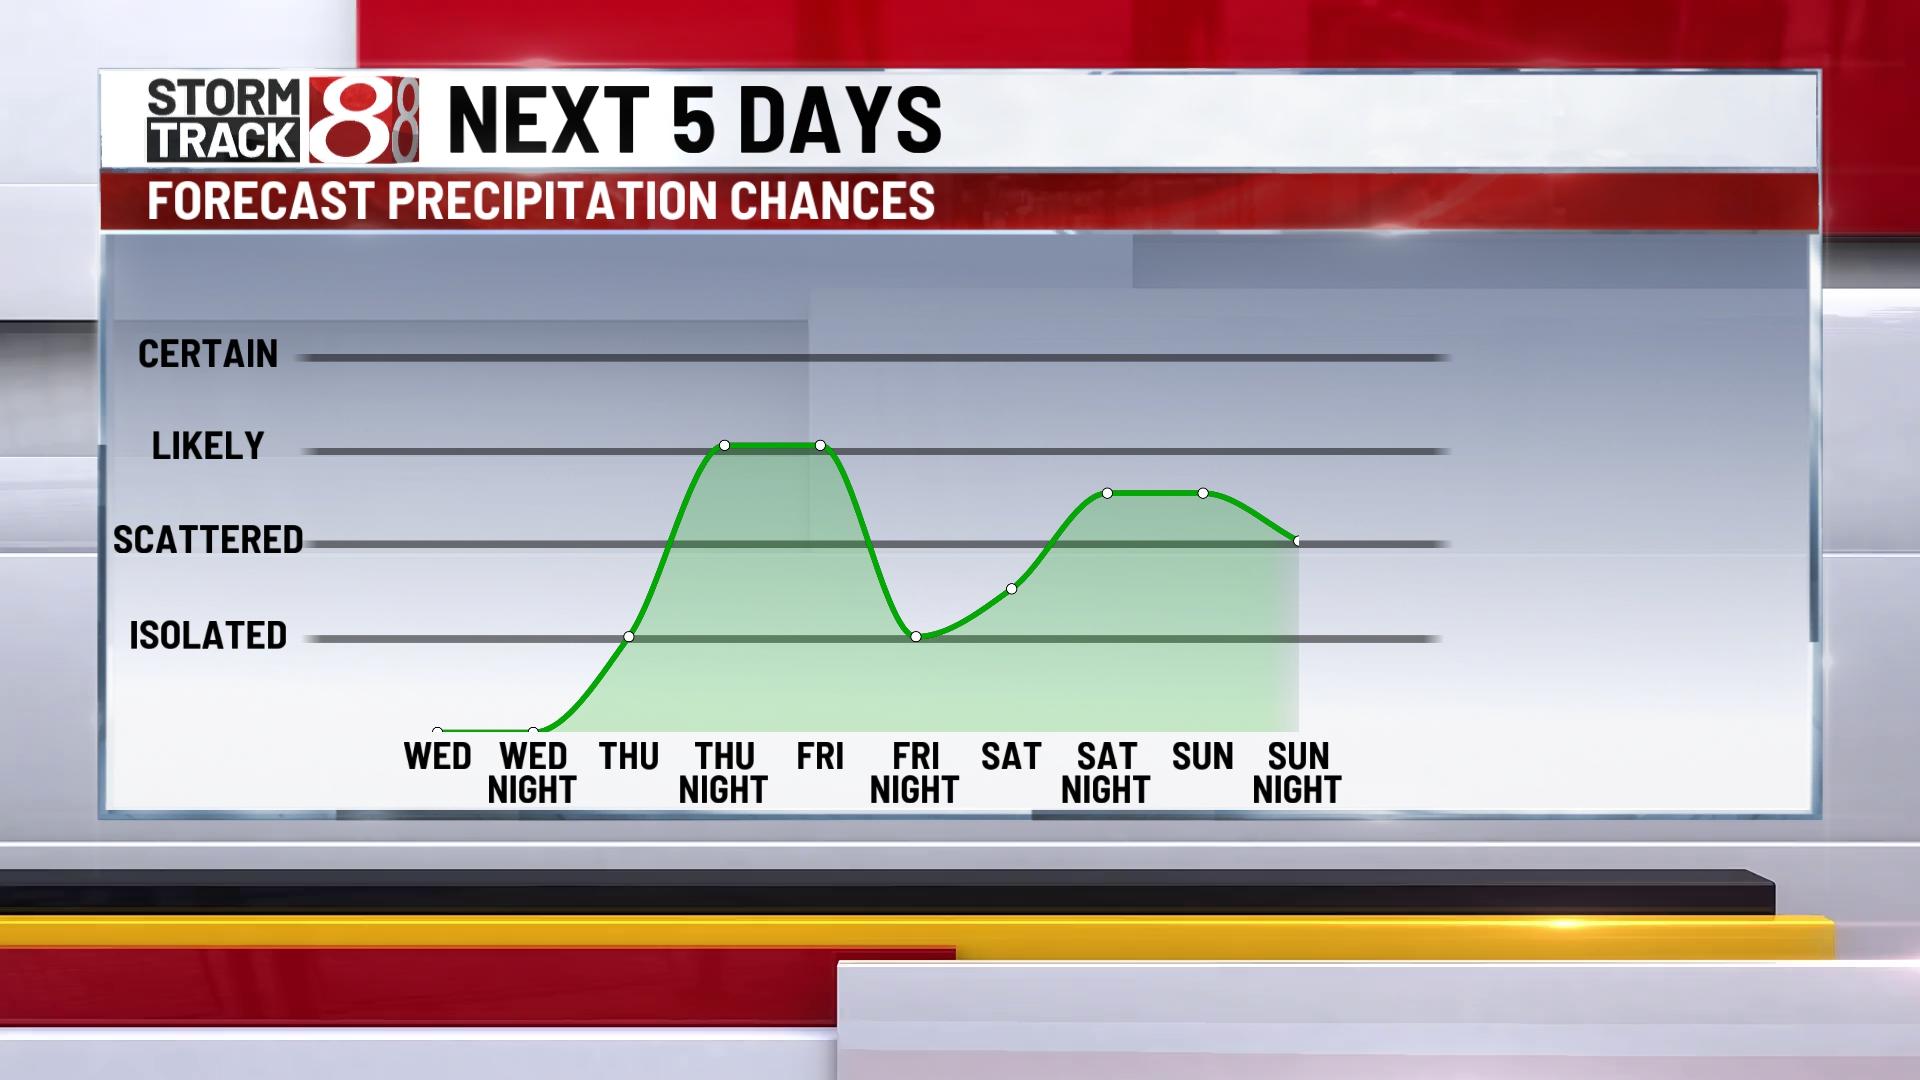 Solid Wednesday, daily rain chances then start on Thursday